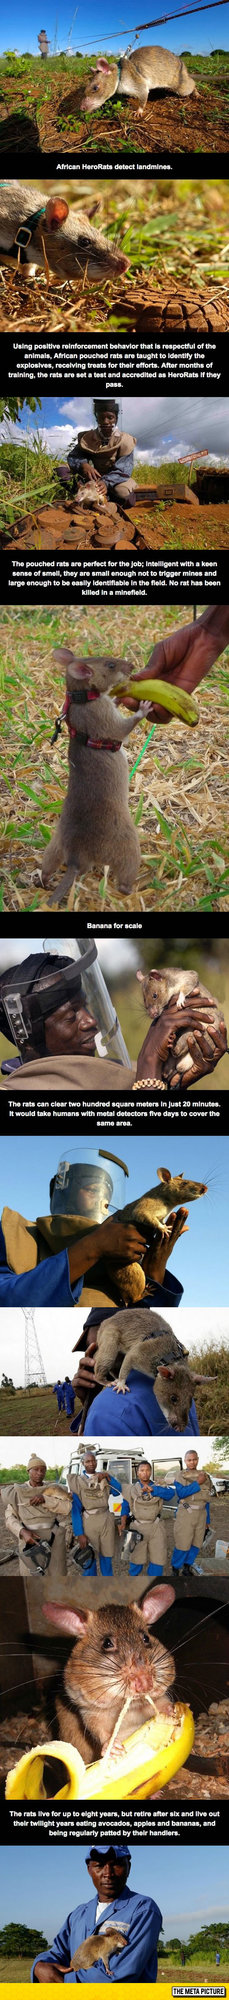 cool-rats-working-mines-Africa.jpg